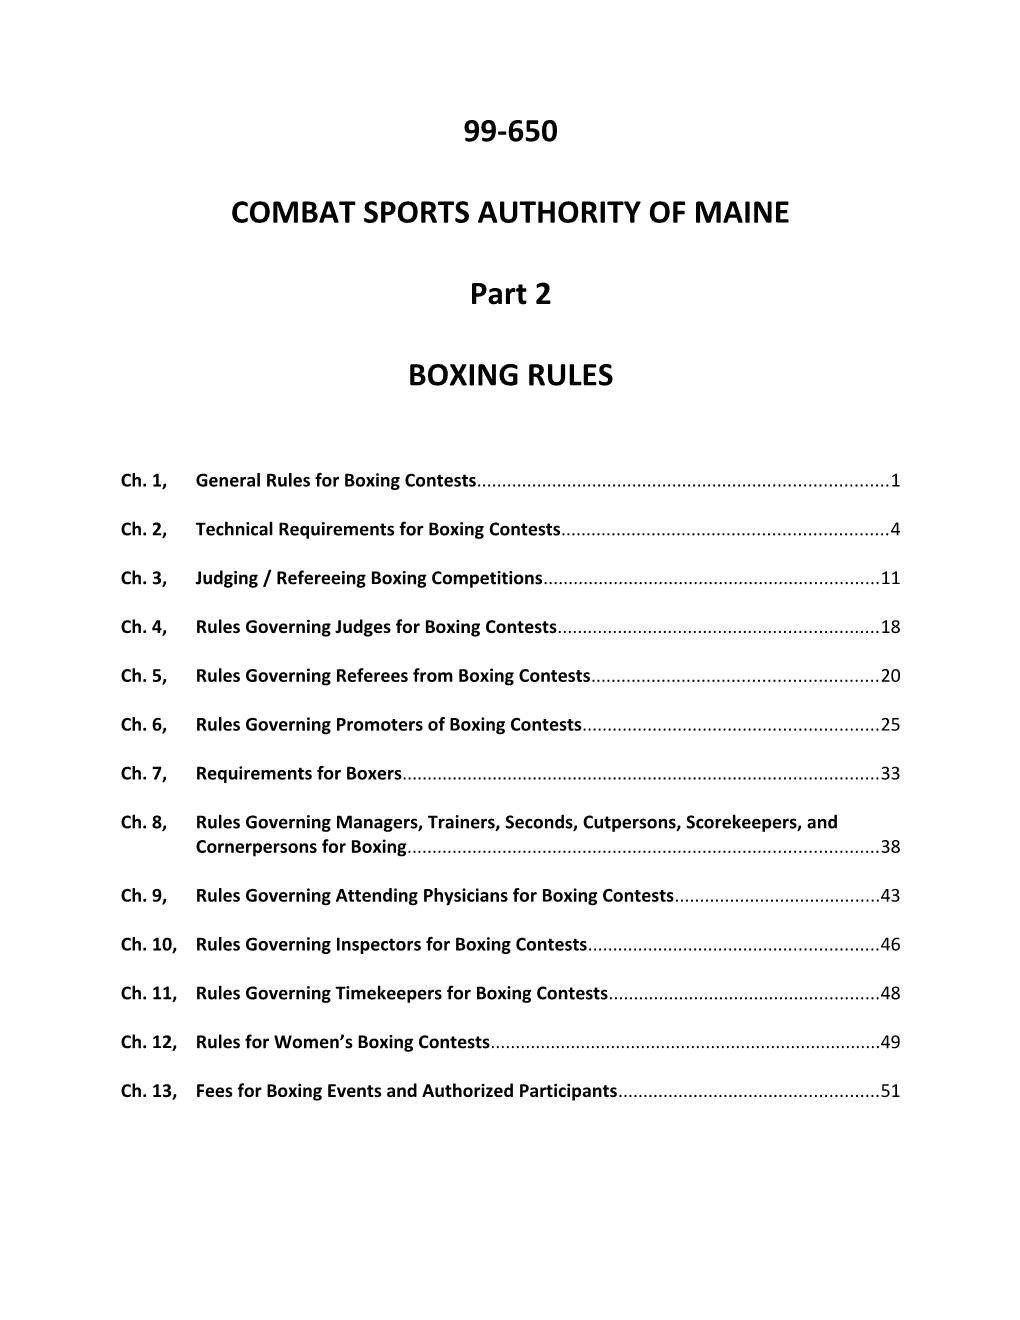 99-650 Combat Sports Authority of Maine: Boxing Rules Page 1